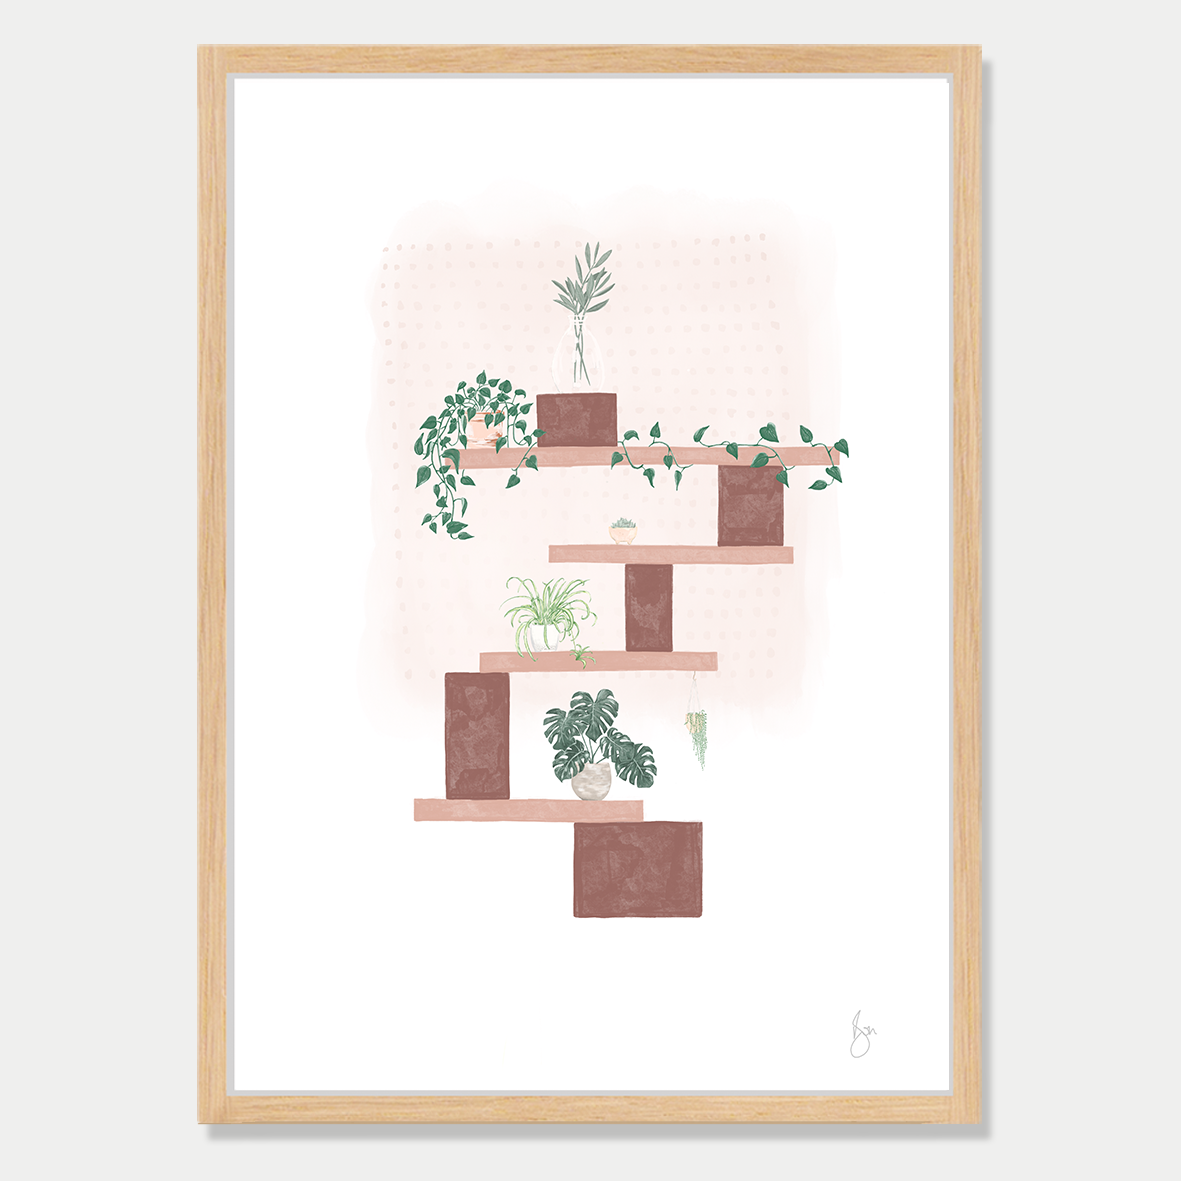 Art print of several blocks balancing with different plants at each level, in a soft autumn colour palette by Bon Jung. Printed in New Zealand by endemicworld and framed in raw oak.